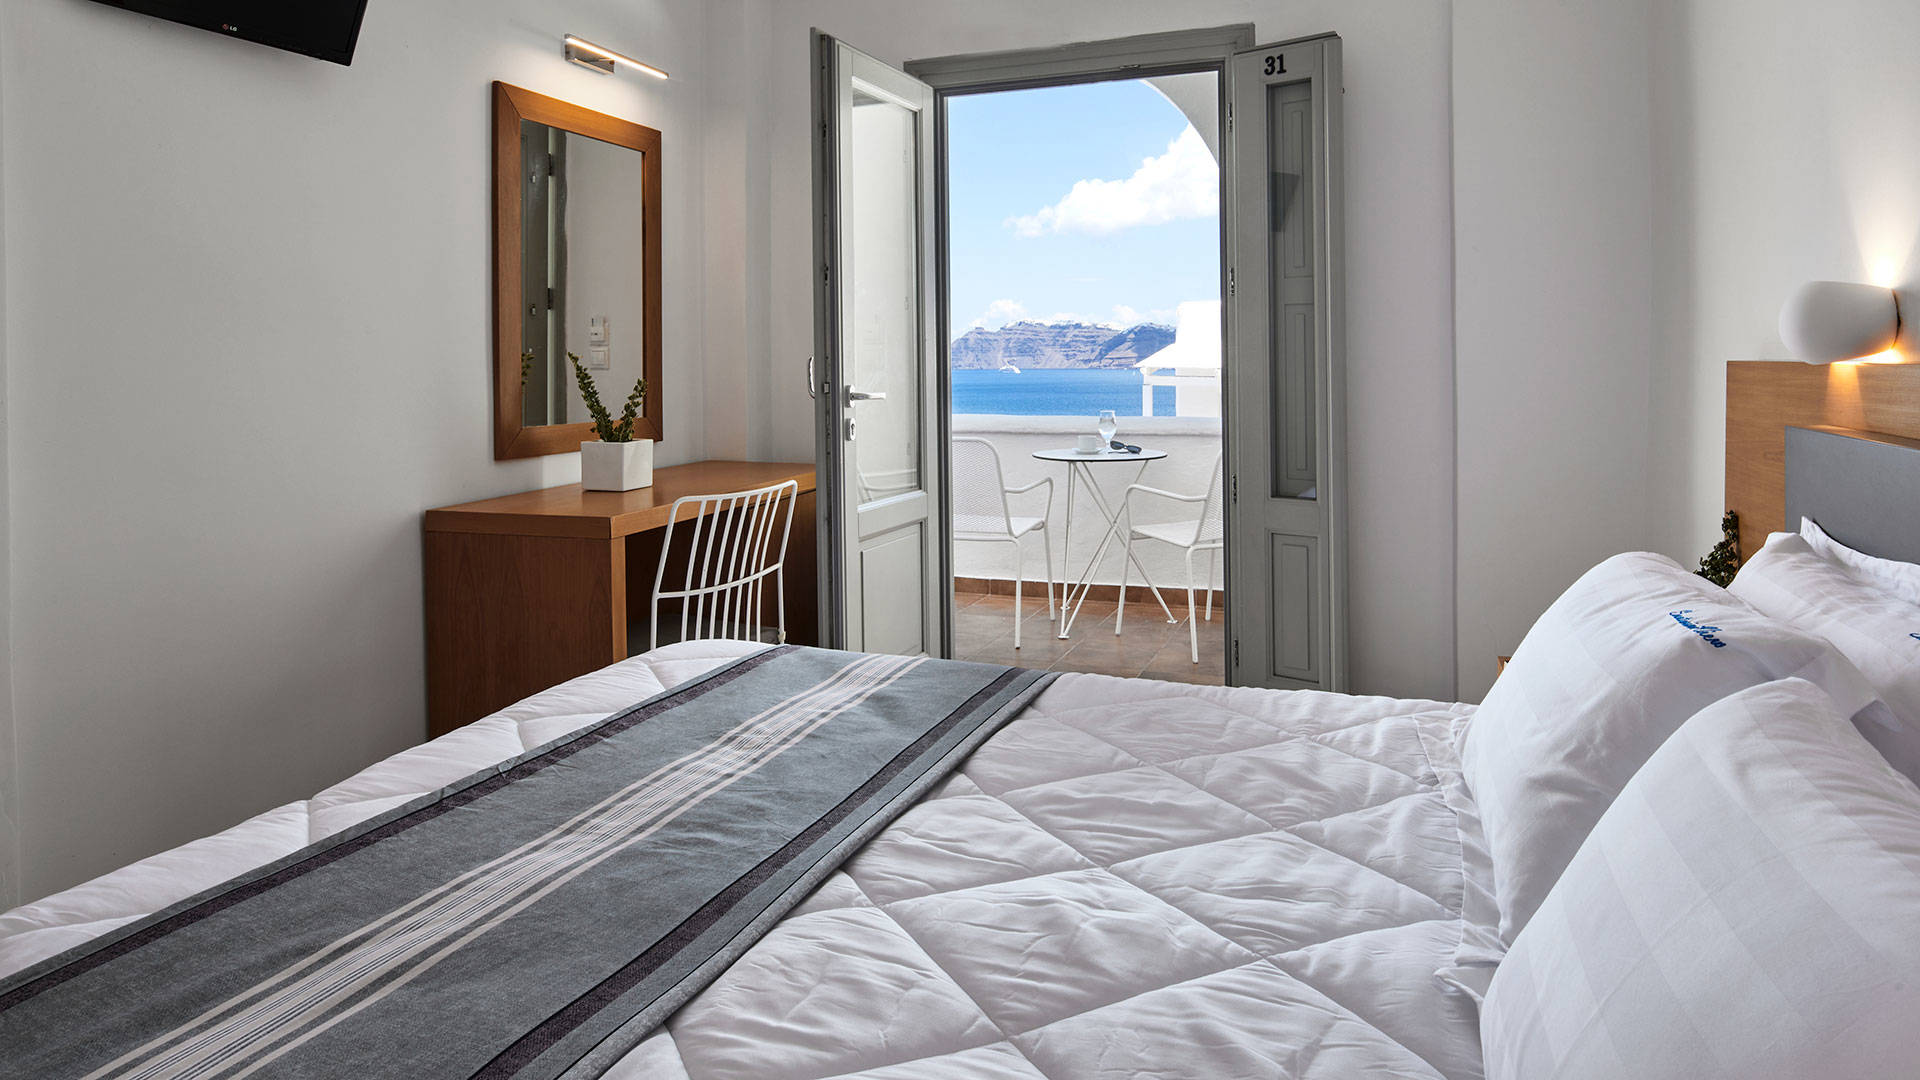 
Santorini View Hotel room with double bed, balcony and sea view